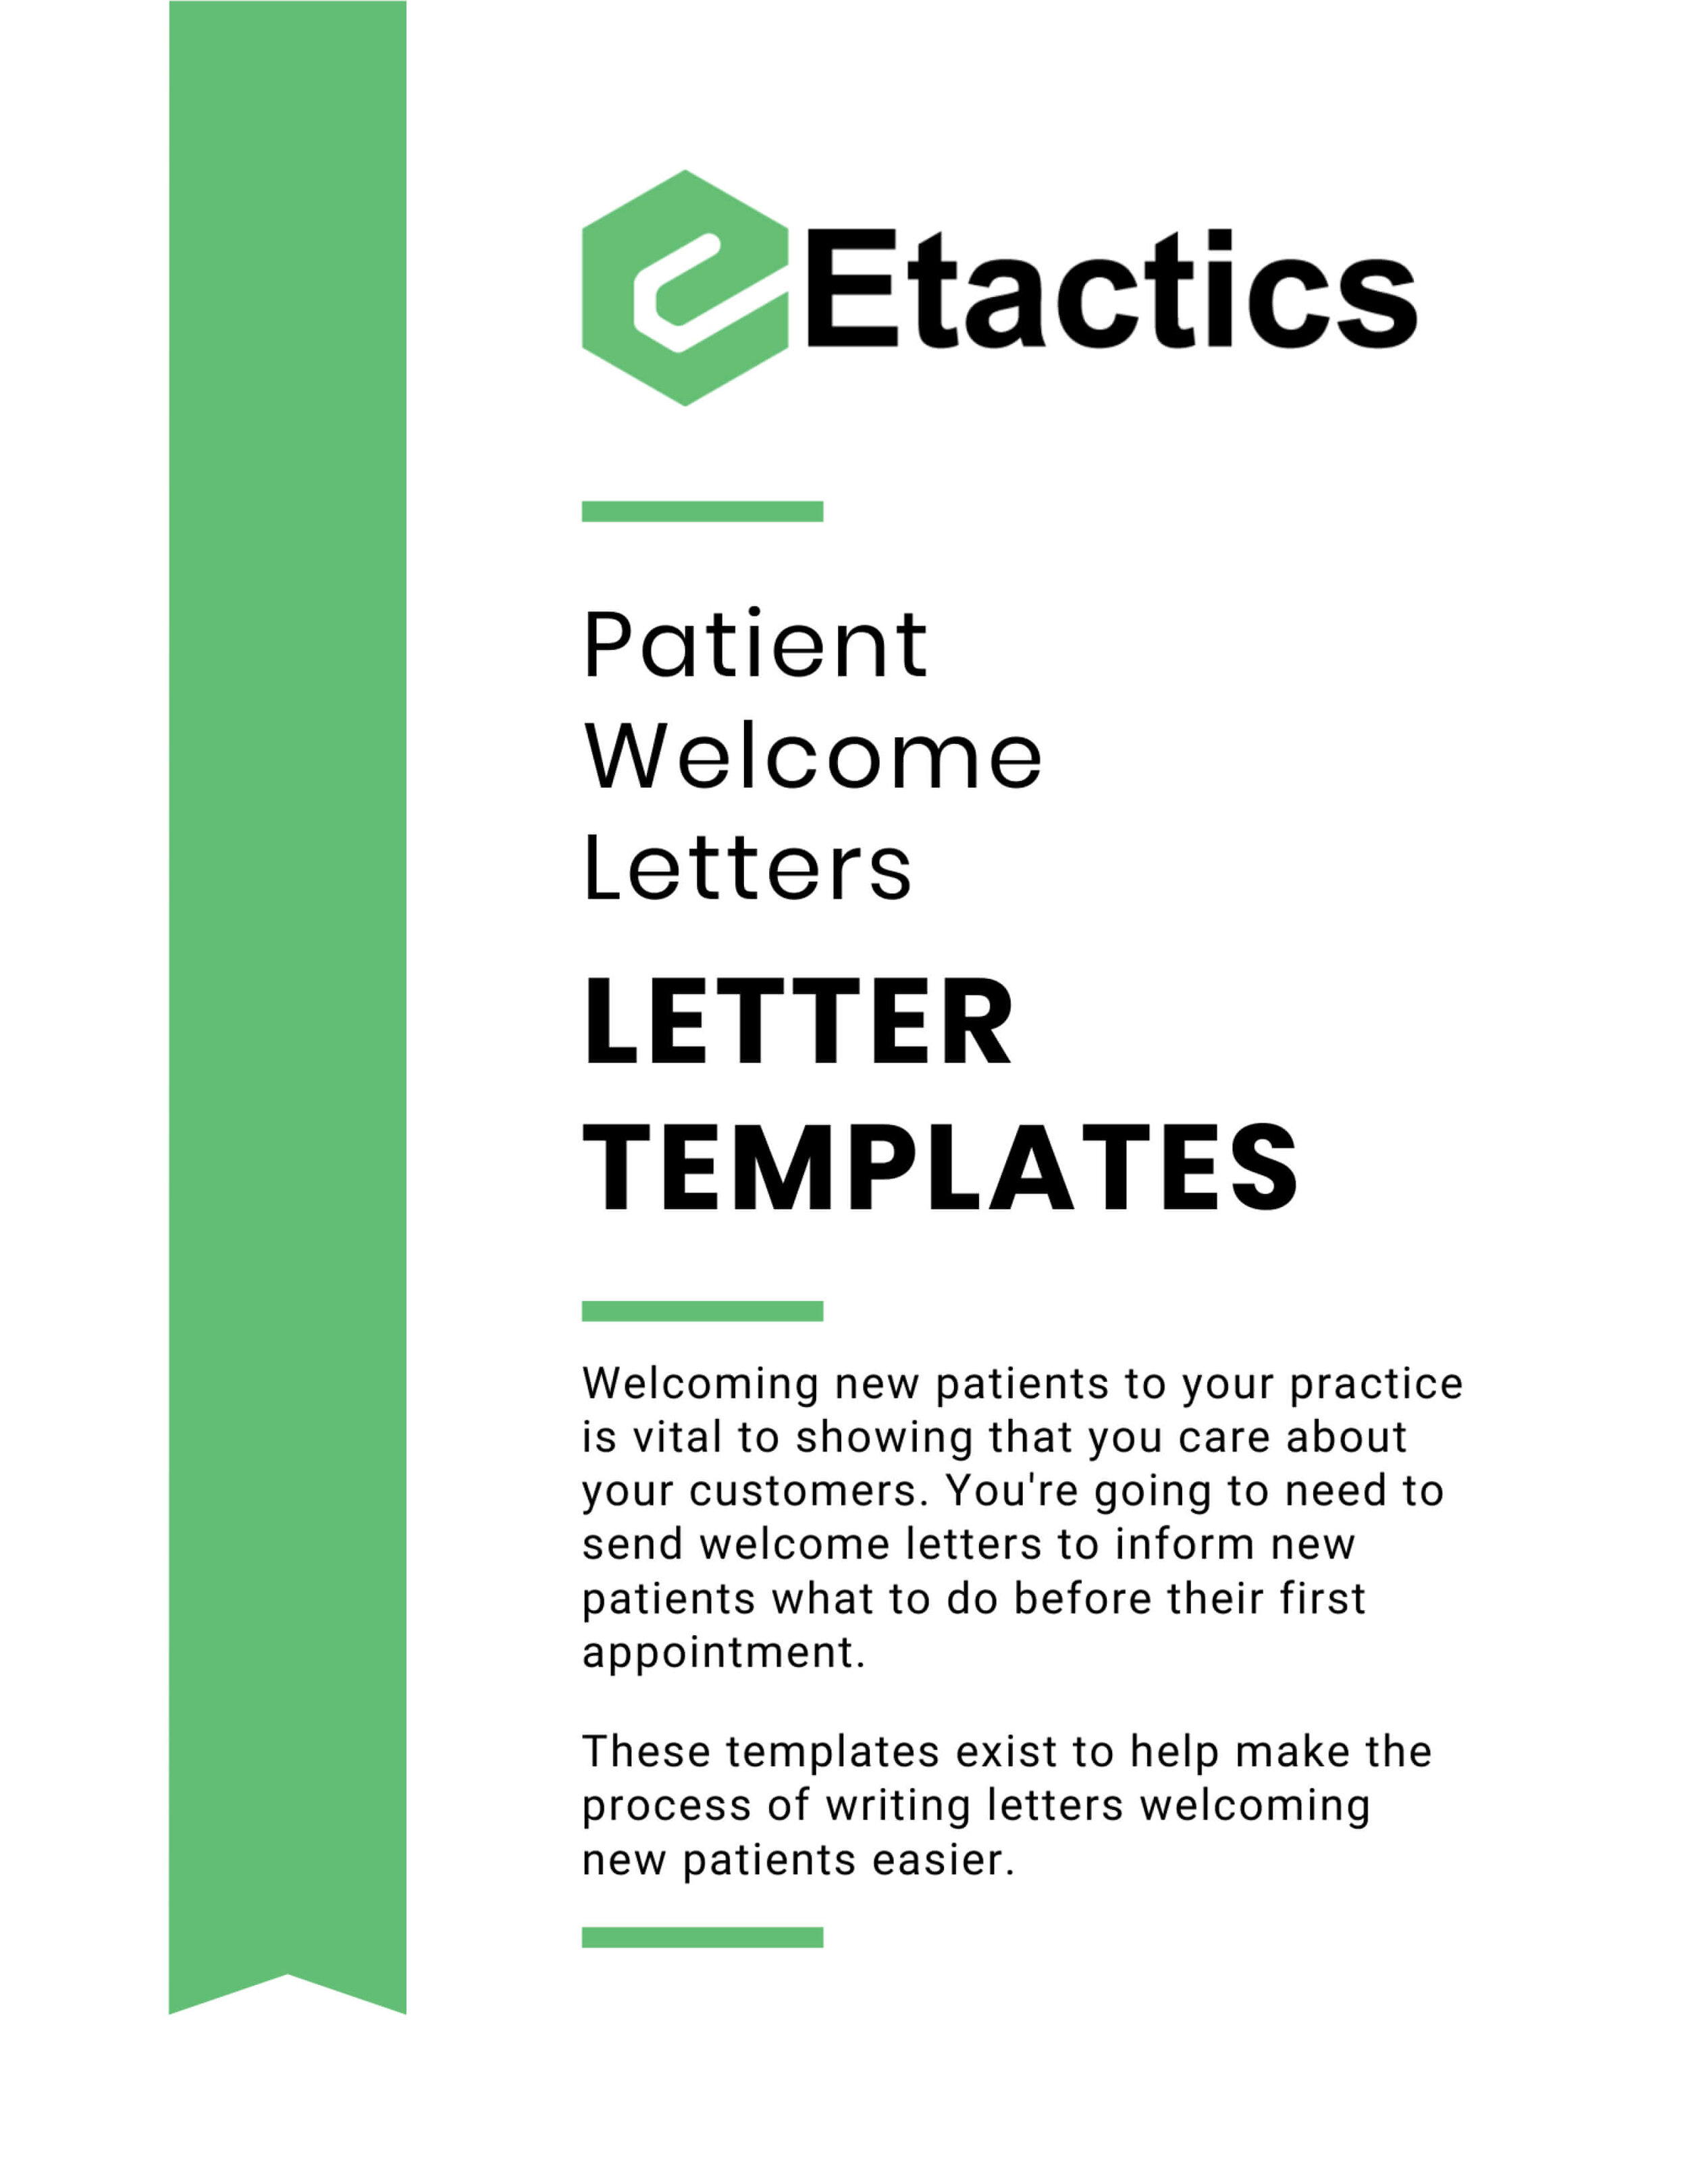 5 New Patient Welcome Letter Templates for Dentists-1.jpg